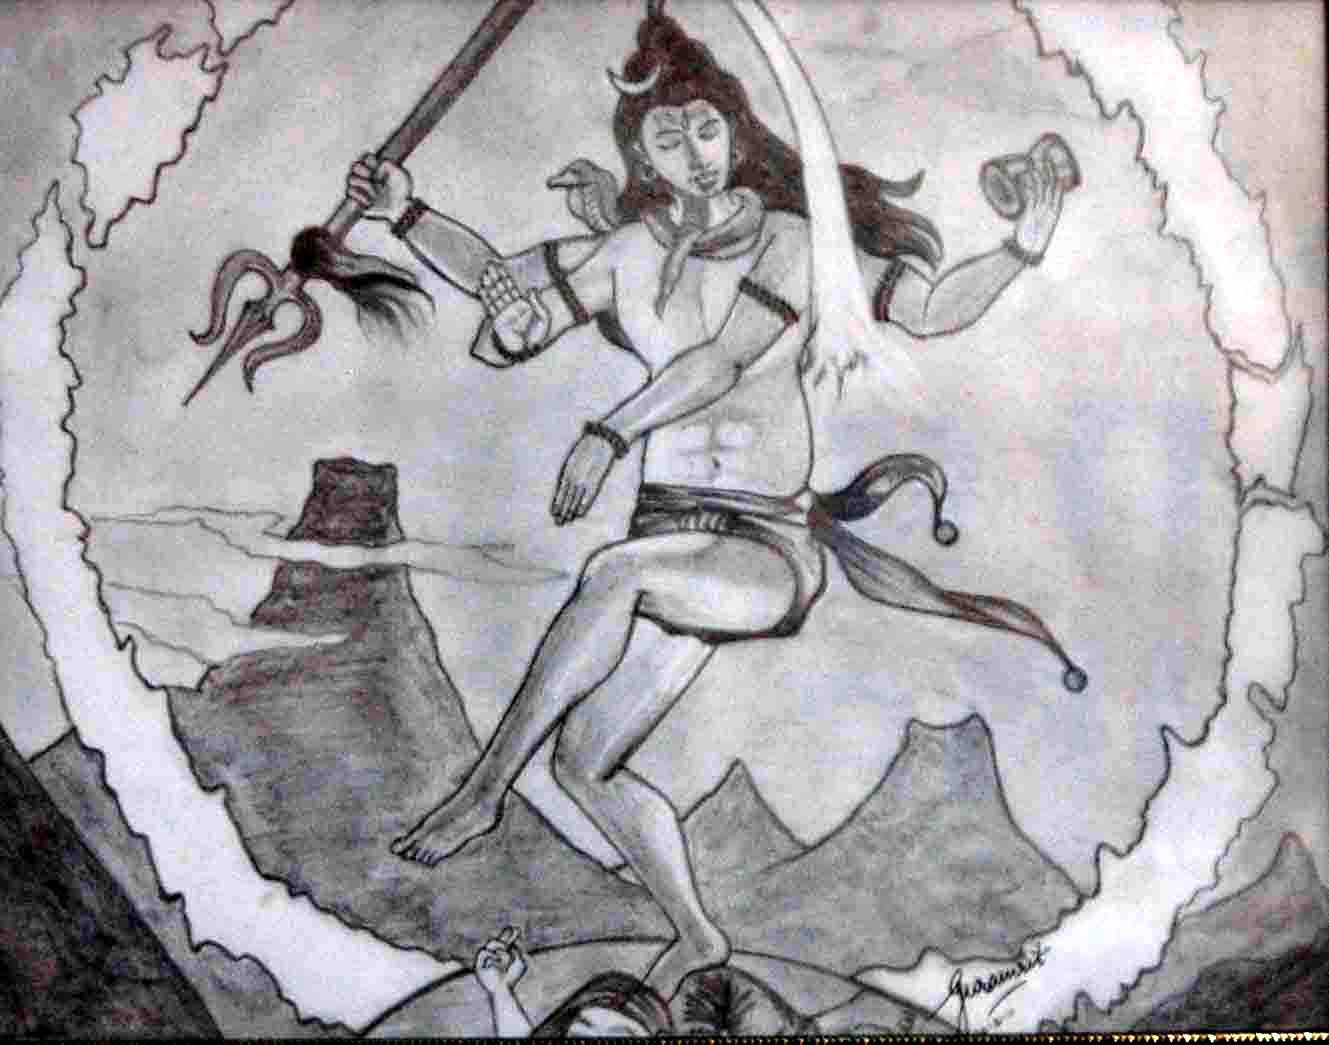 Pencil sketch of Lord Shiva Painting by Timpi Cheema - Pixels